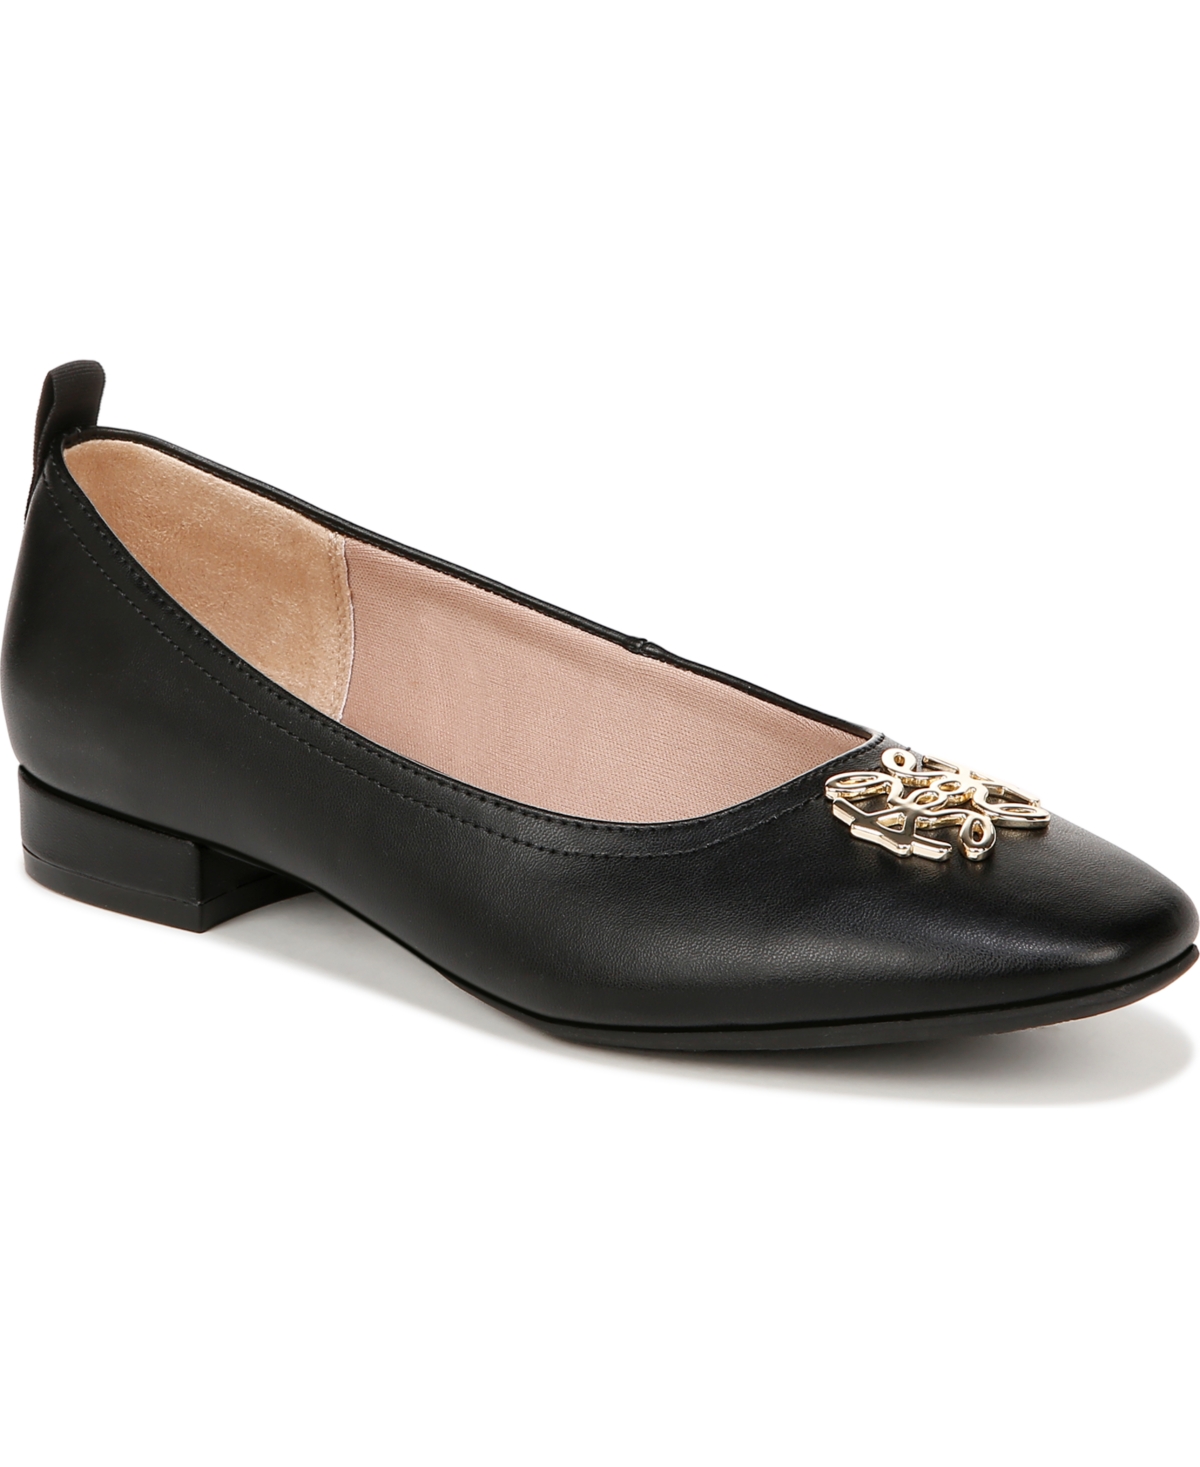 Lifestride Cameo 2 Flats In Black Faux Leather